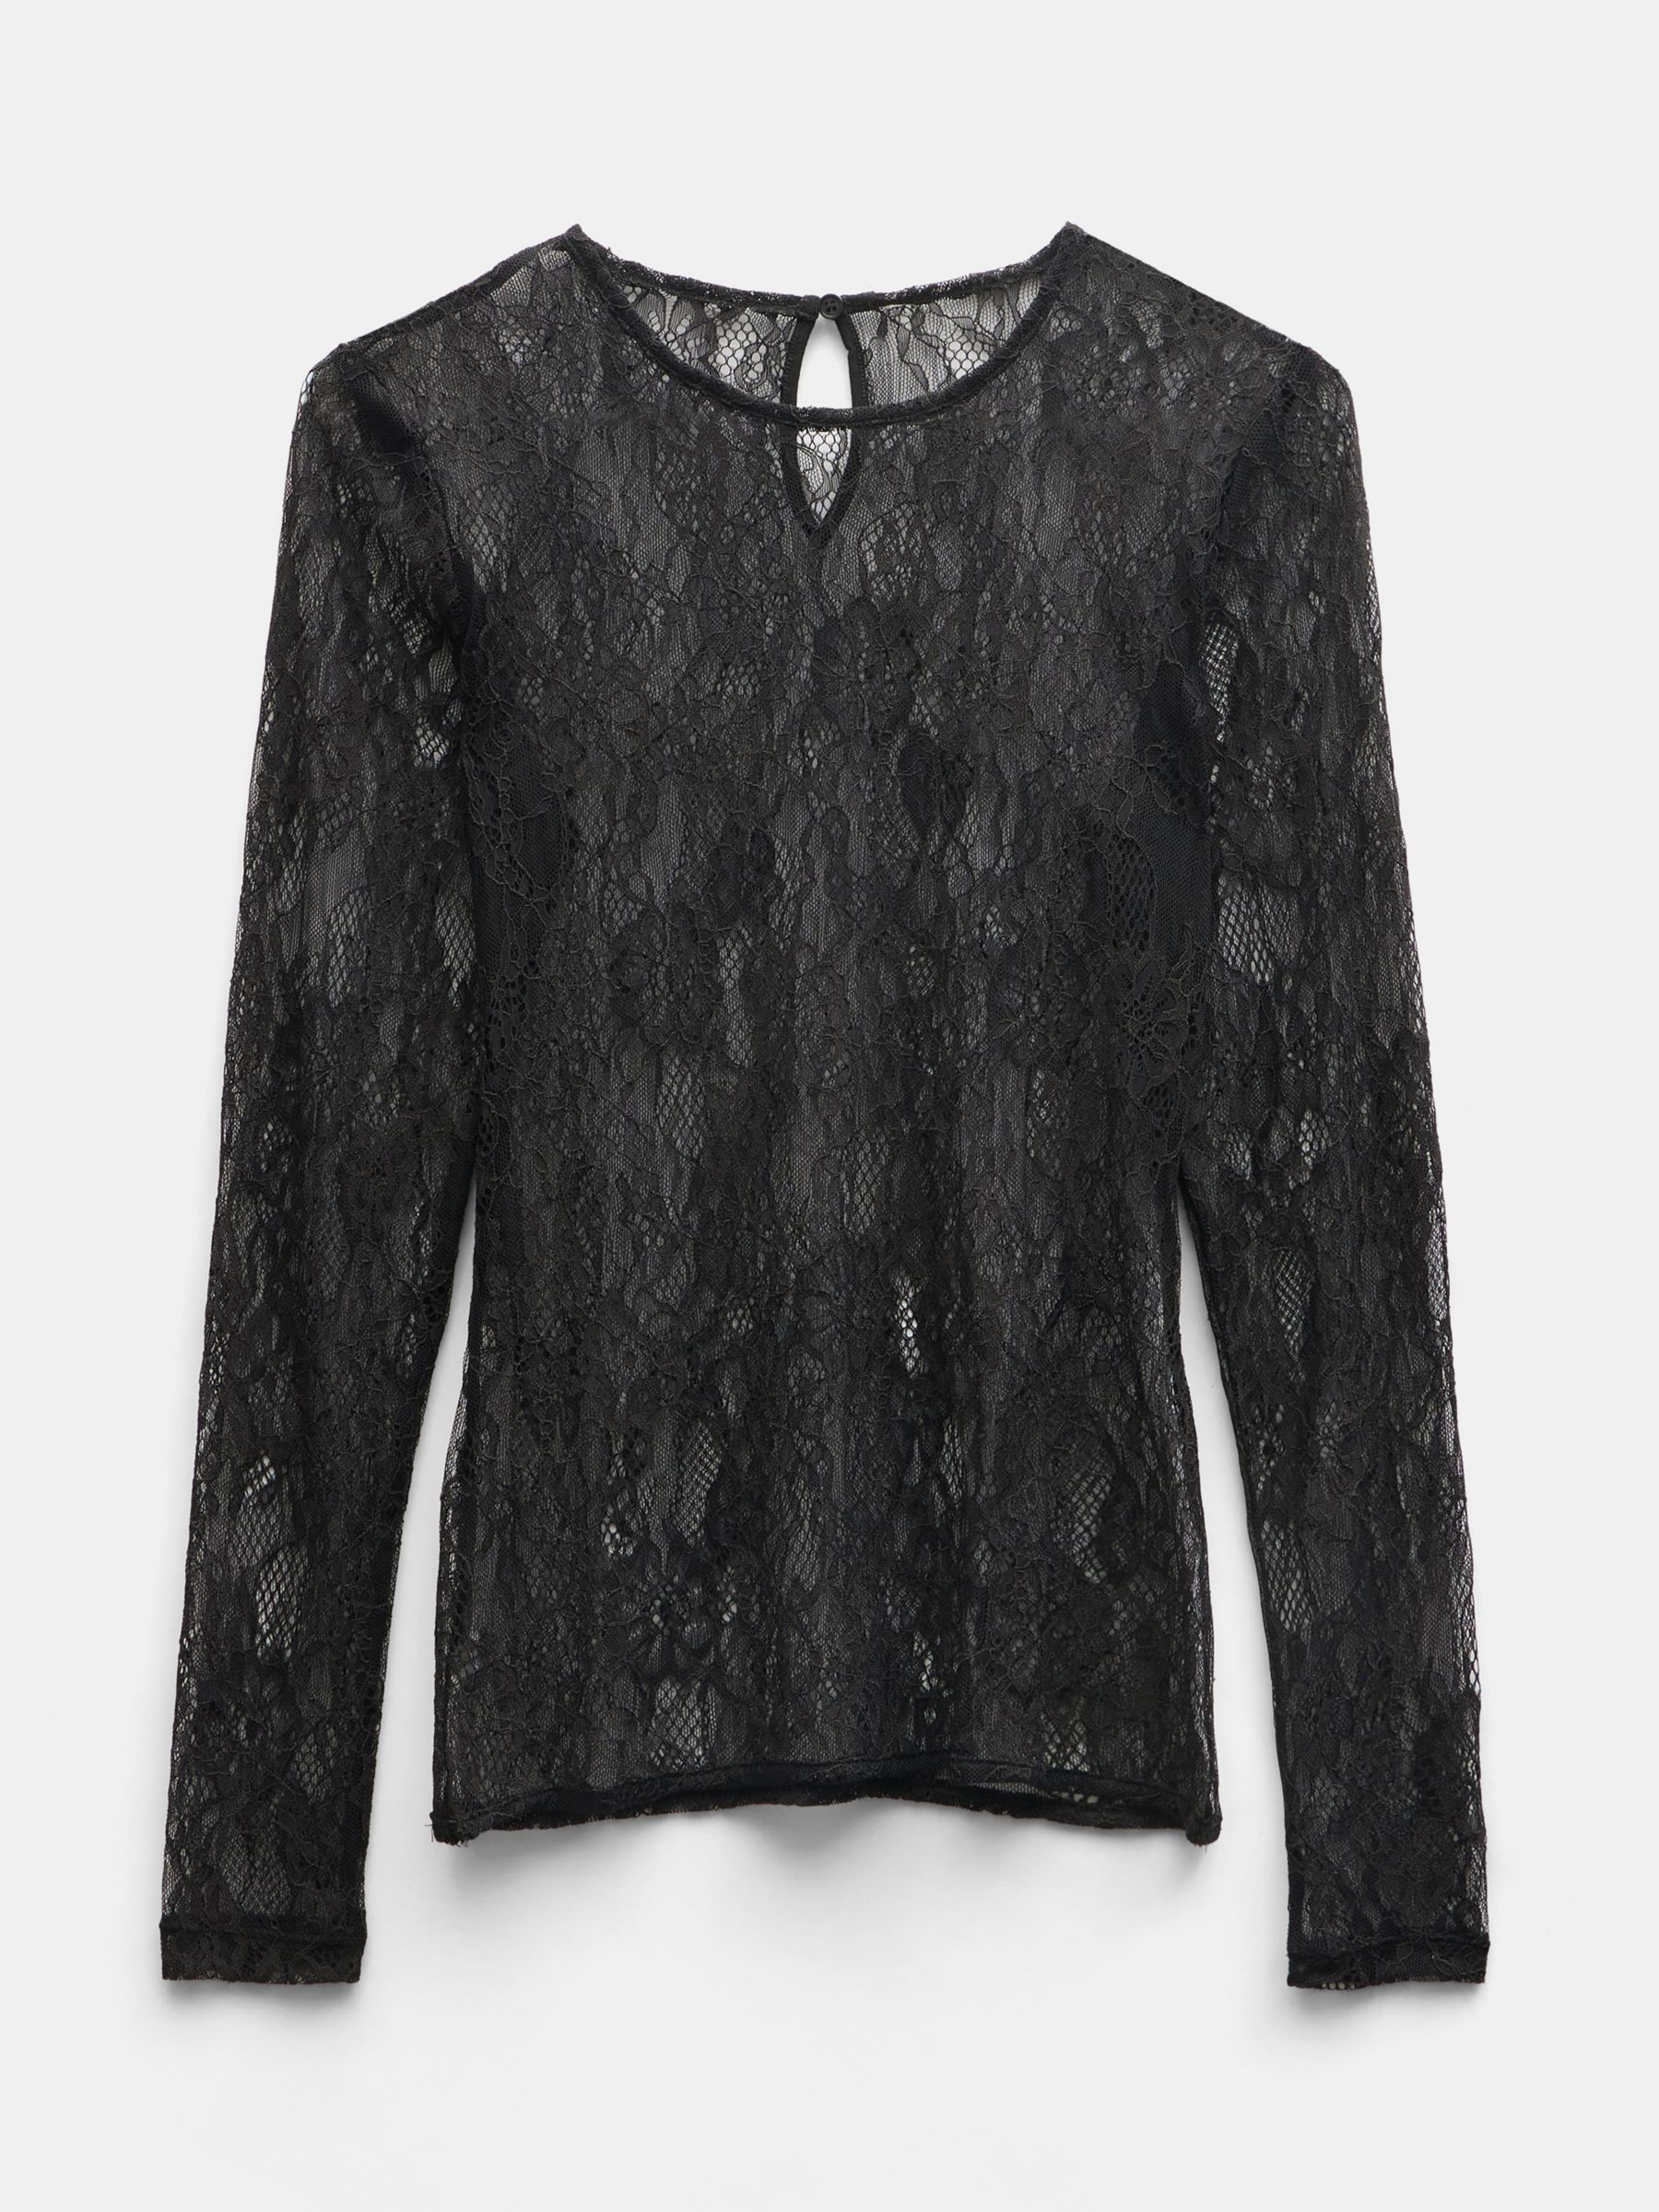 Lace Black Long Sleeve Top